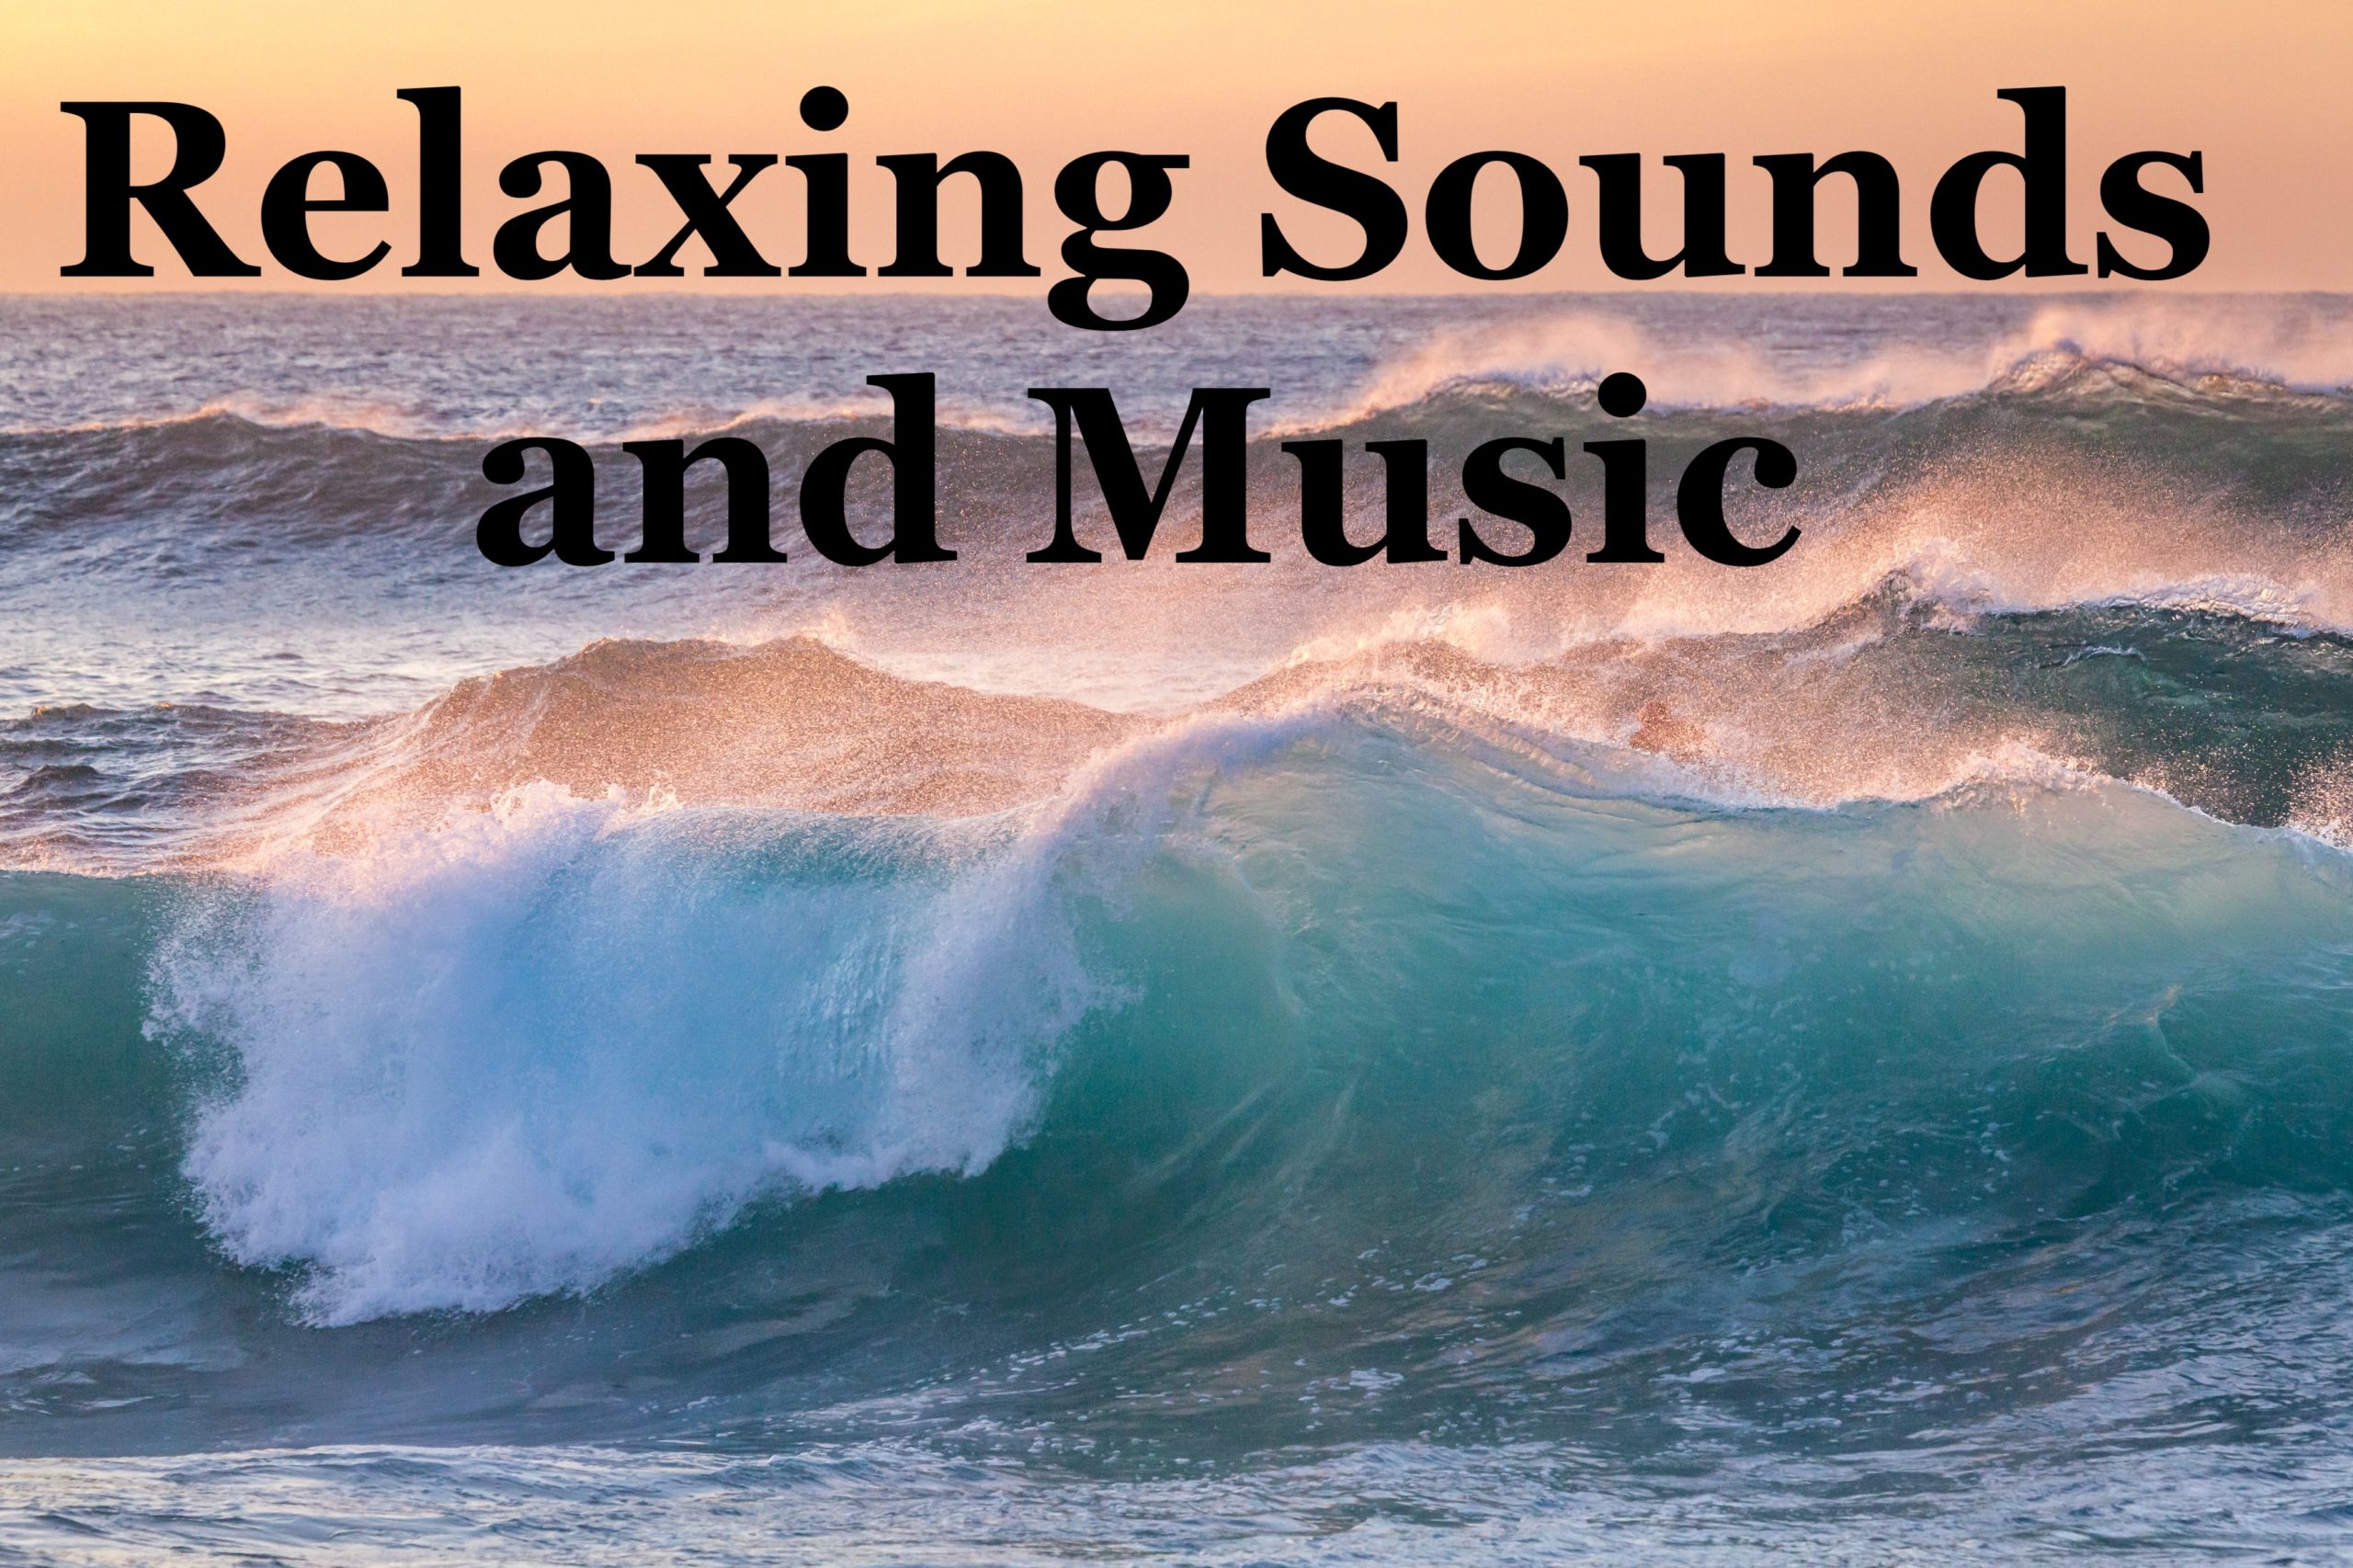 Ocean Wave - Sounds and Music